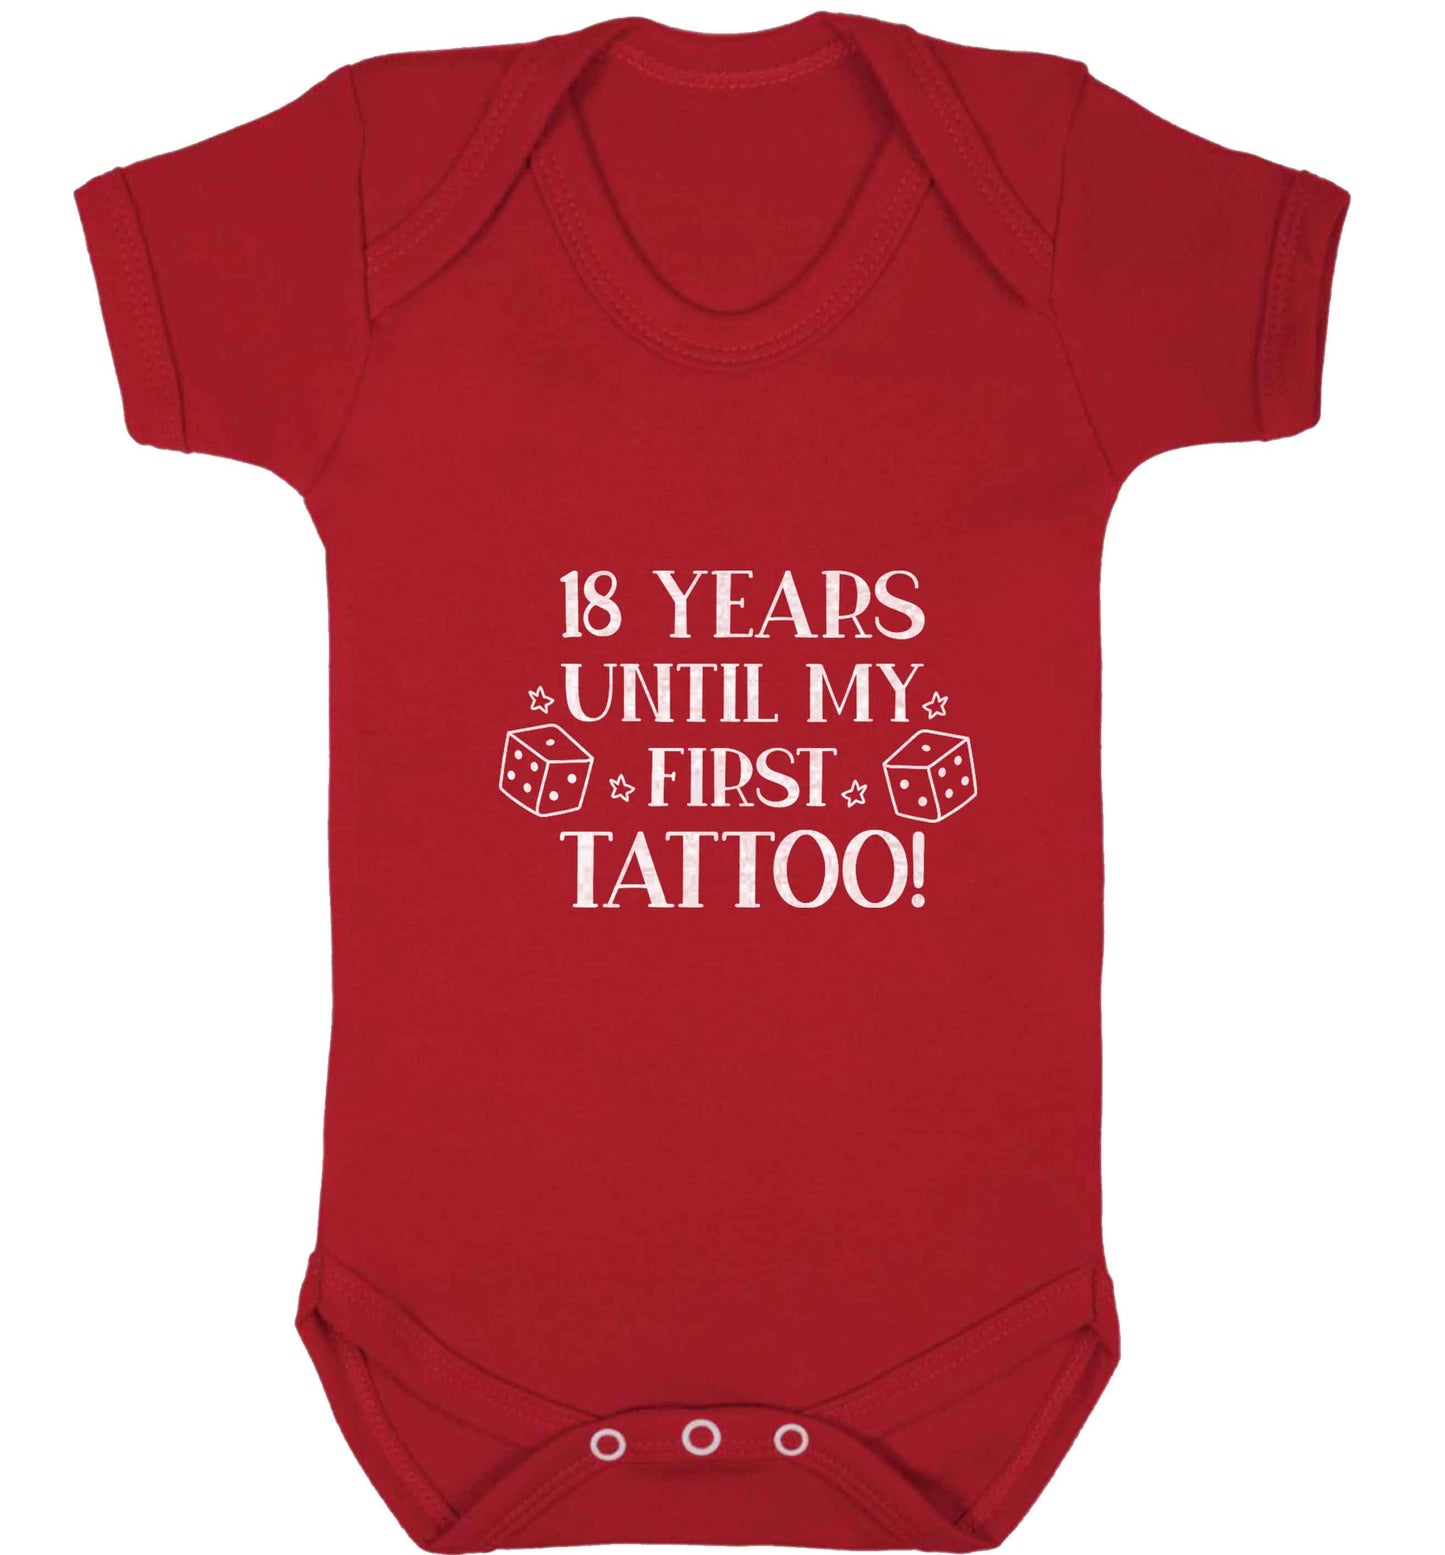 18 Years Until my First Tattoo baby vest red 18-24 months